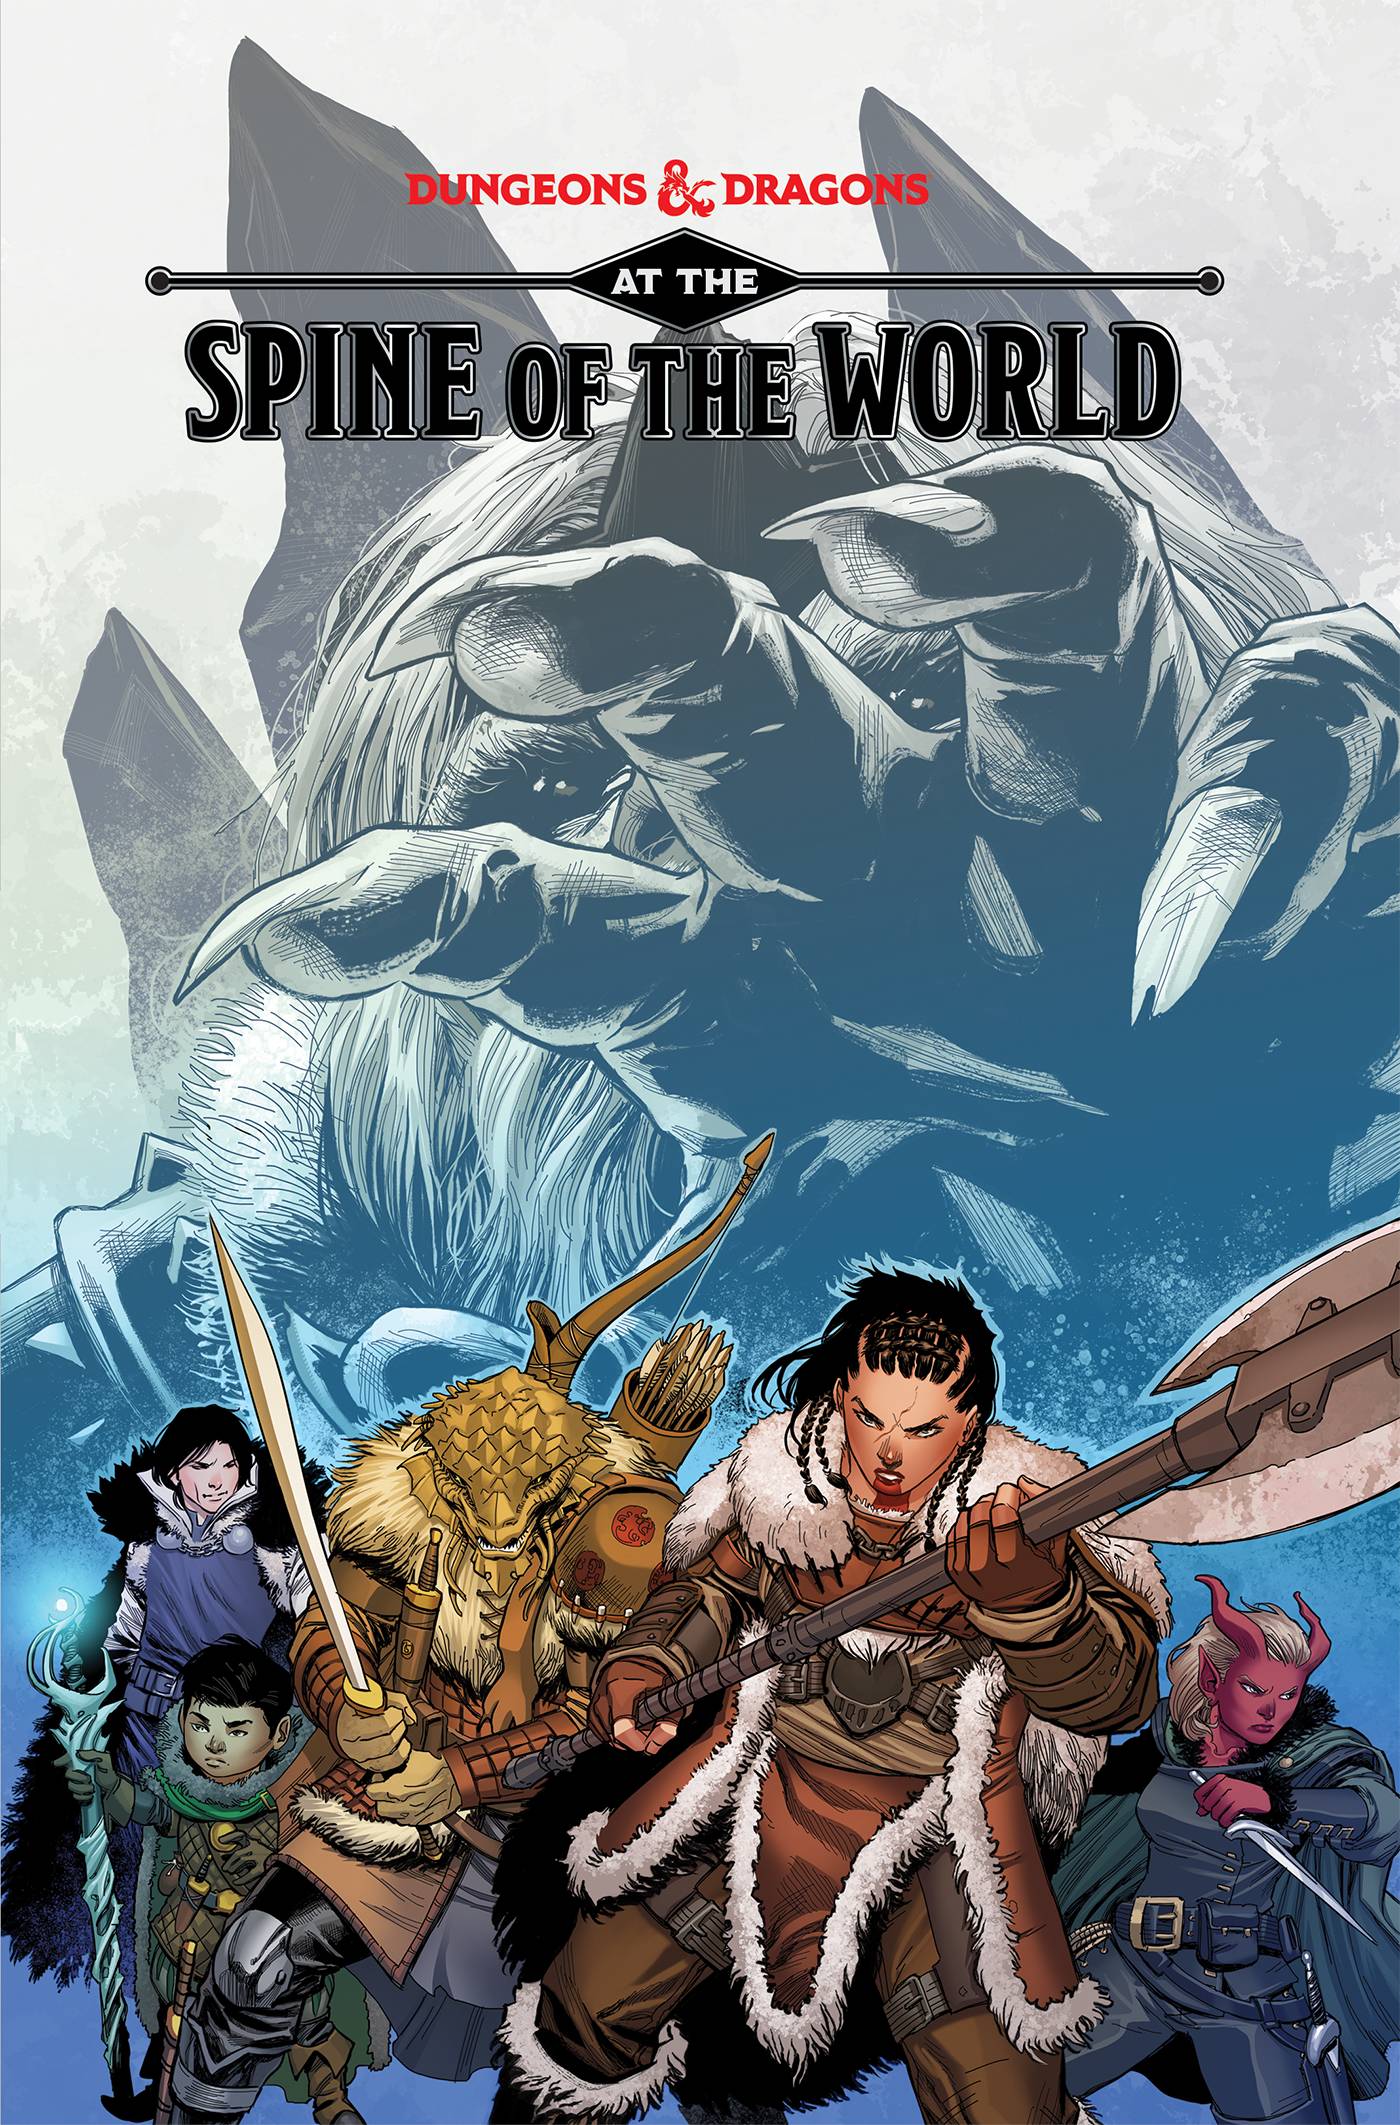 DUNGEONS & DRAGONS AT SPINE OF WORLD TP 01